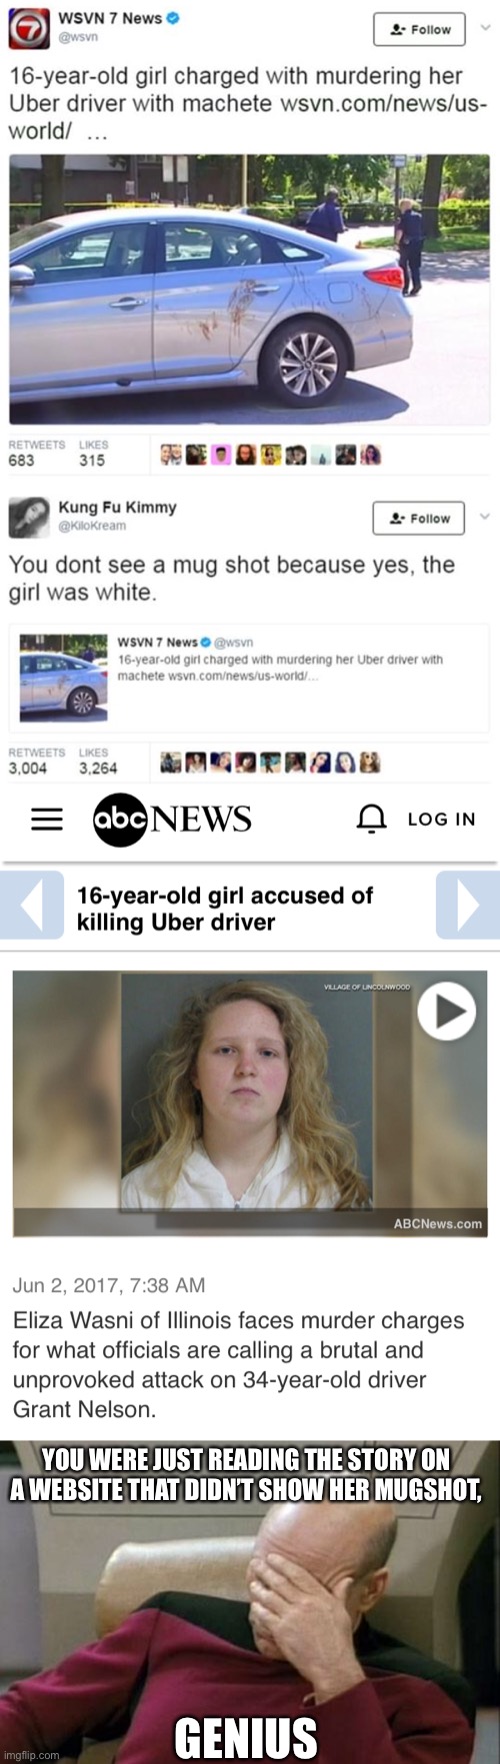 People like this vote | GENIUS; YOU WERE JUST READING THE STORY ON A WEBSITE THAT DIDN’T SHOW HER MUGSHOT, | image tagged in memes,captain picard facepalm,murder,mugshot,white girl,white privilege | made w/ Imgflip meme maker